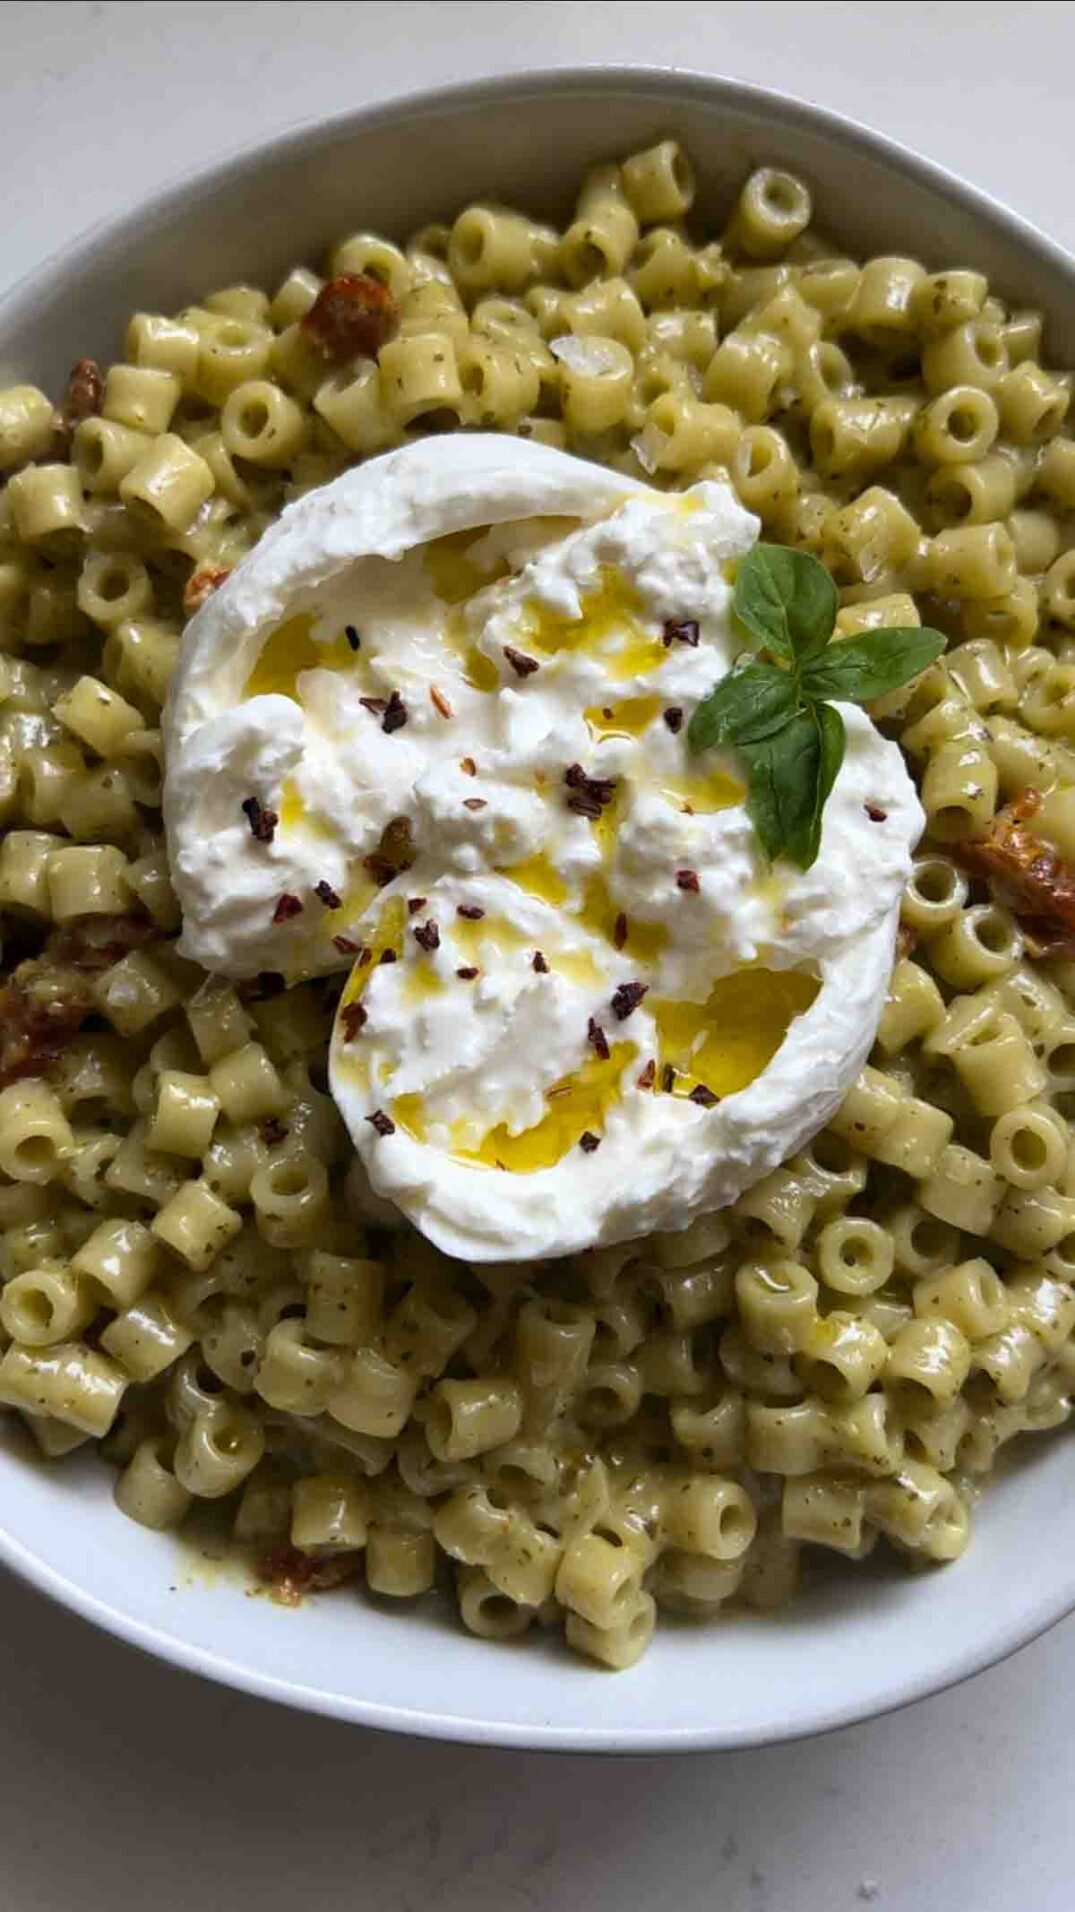 ditalini pasta tossed in creamy pesto sauce in a while bowl with burrata on top